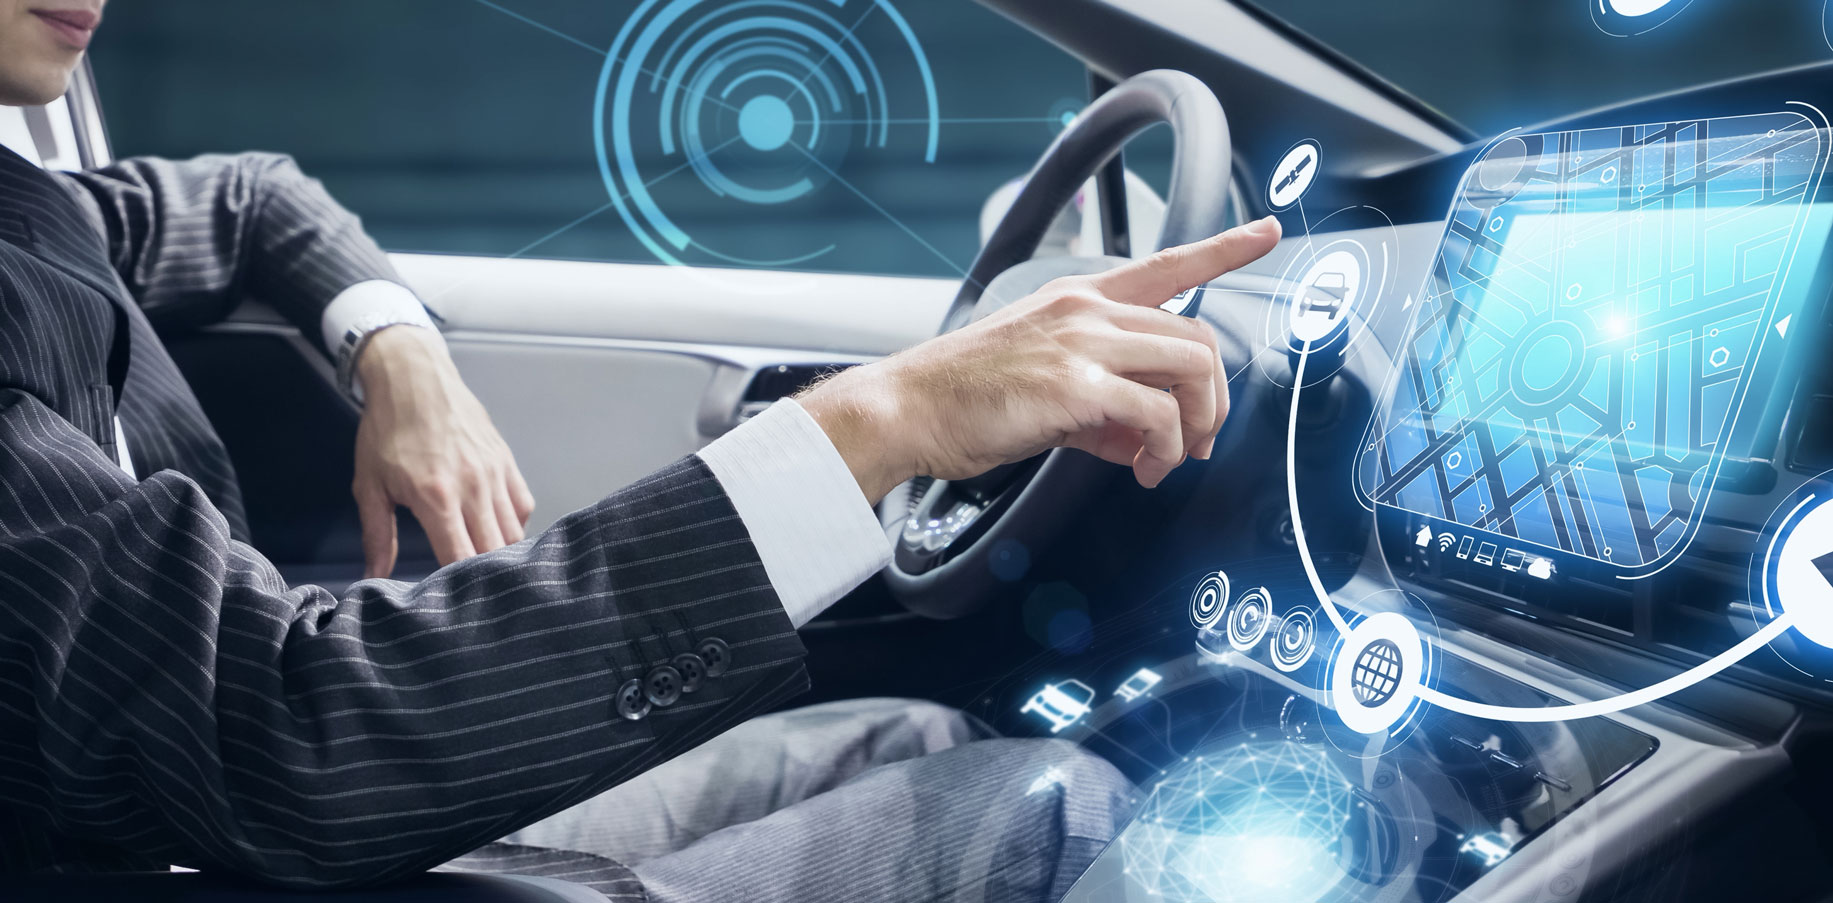 Automotive Ecosystem Data Sharing Principles released by CADA